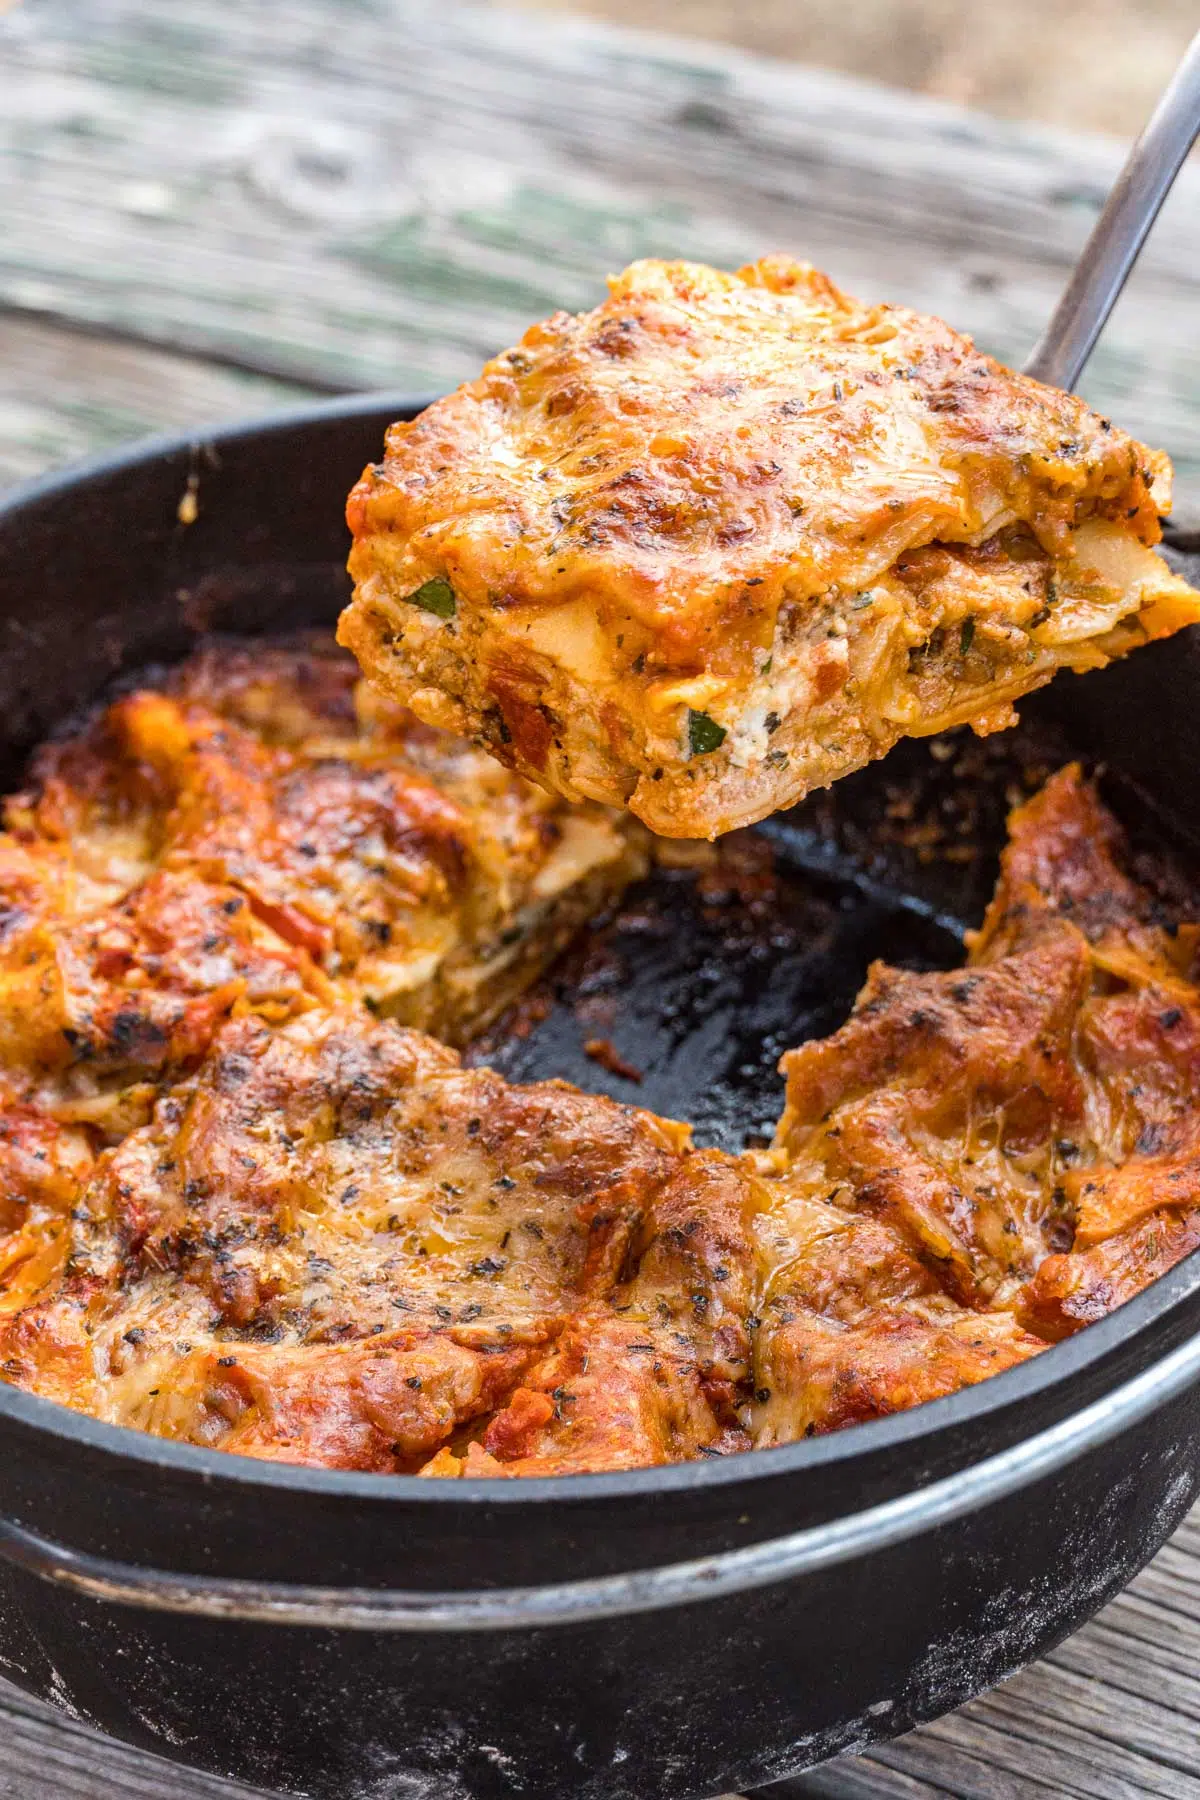 Lifting a slice of lasagna out of a Dutch oven.